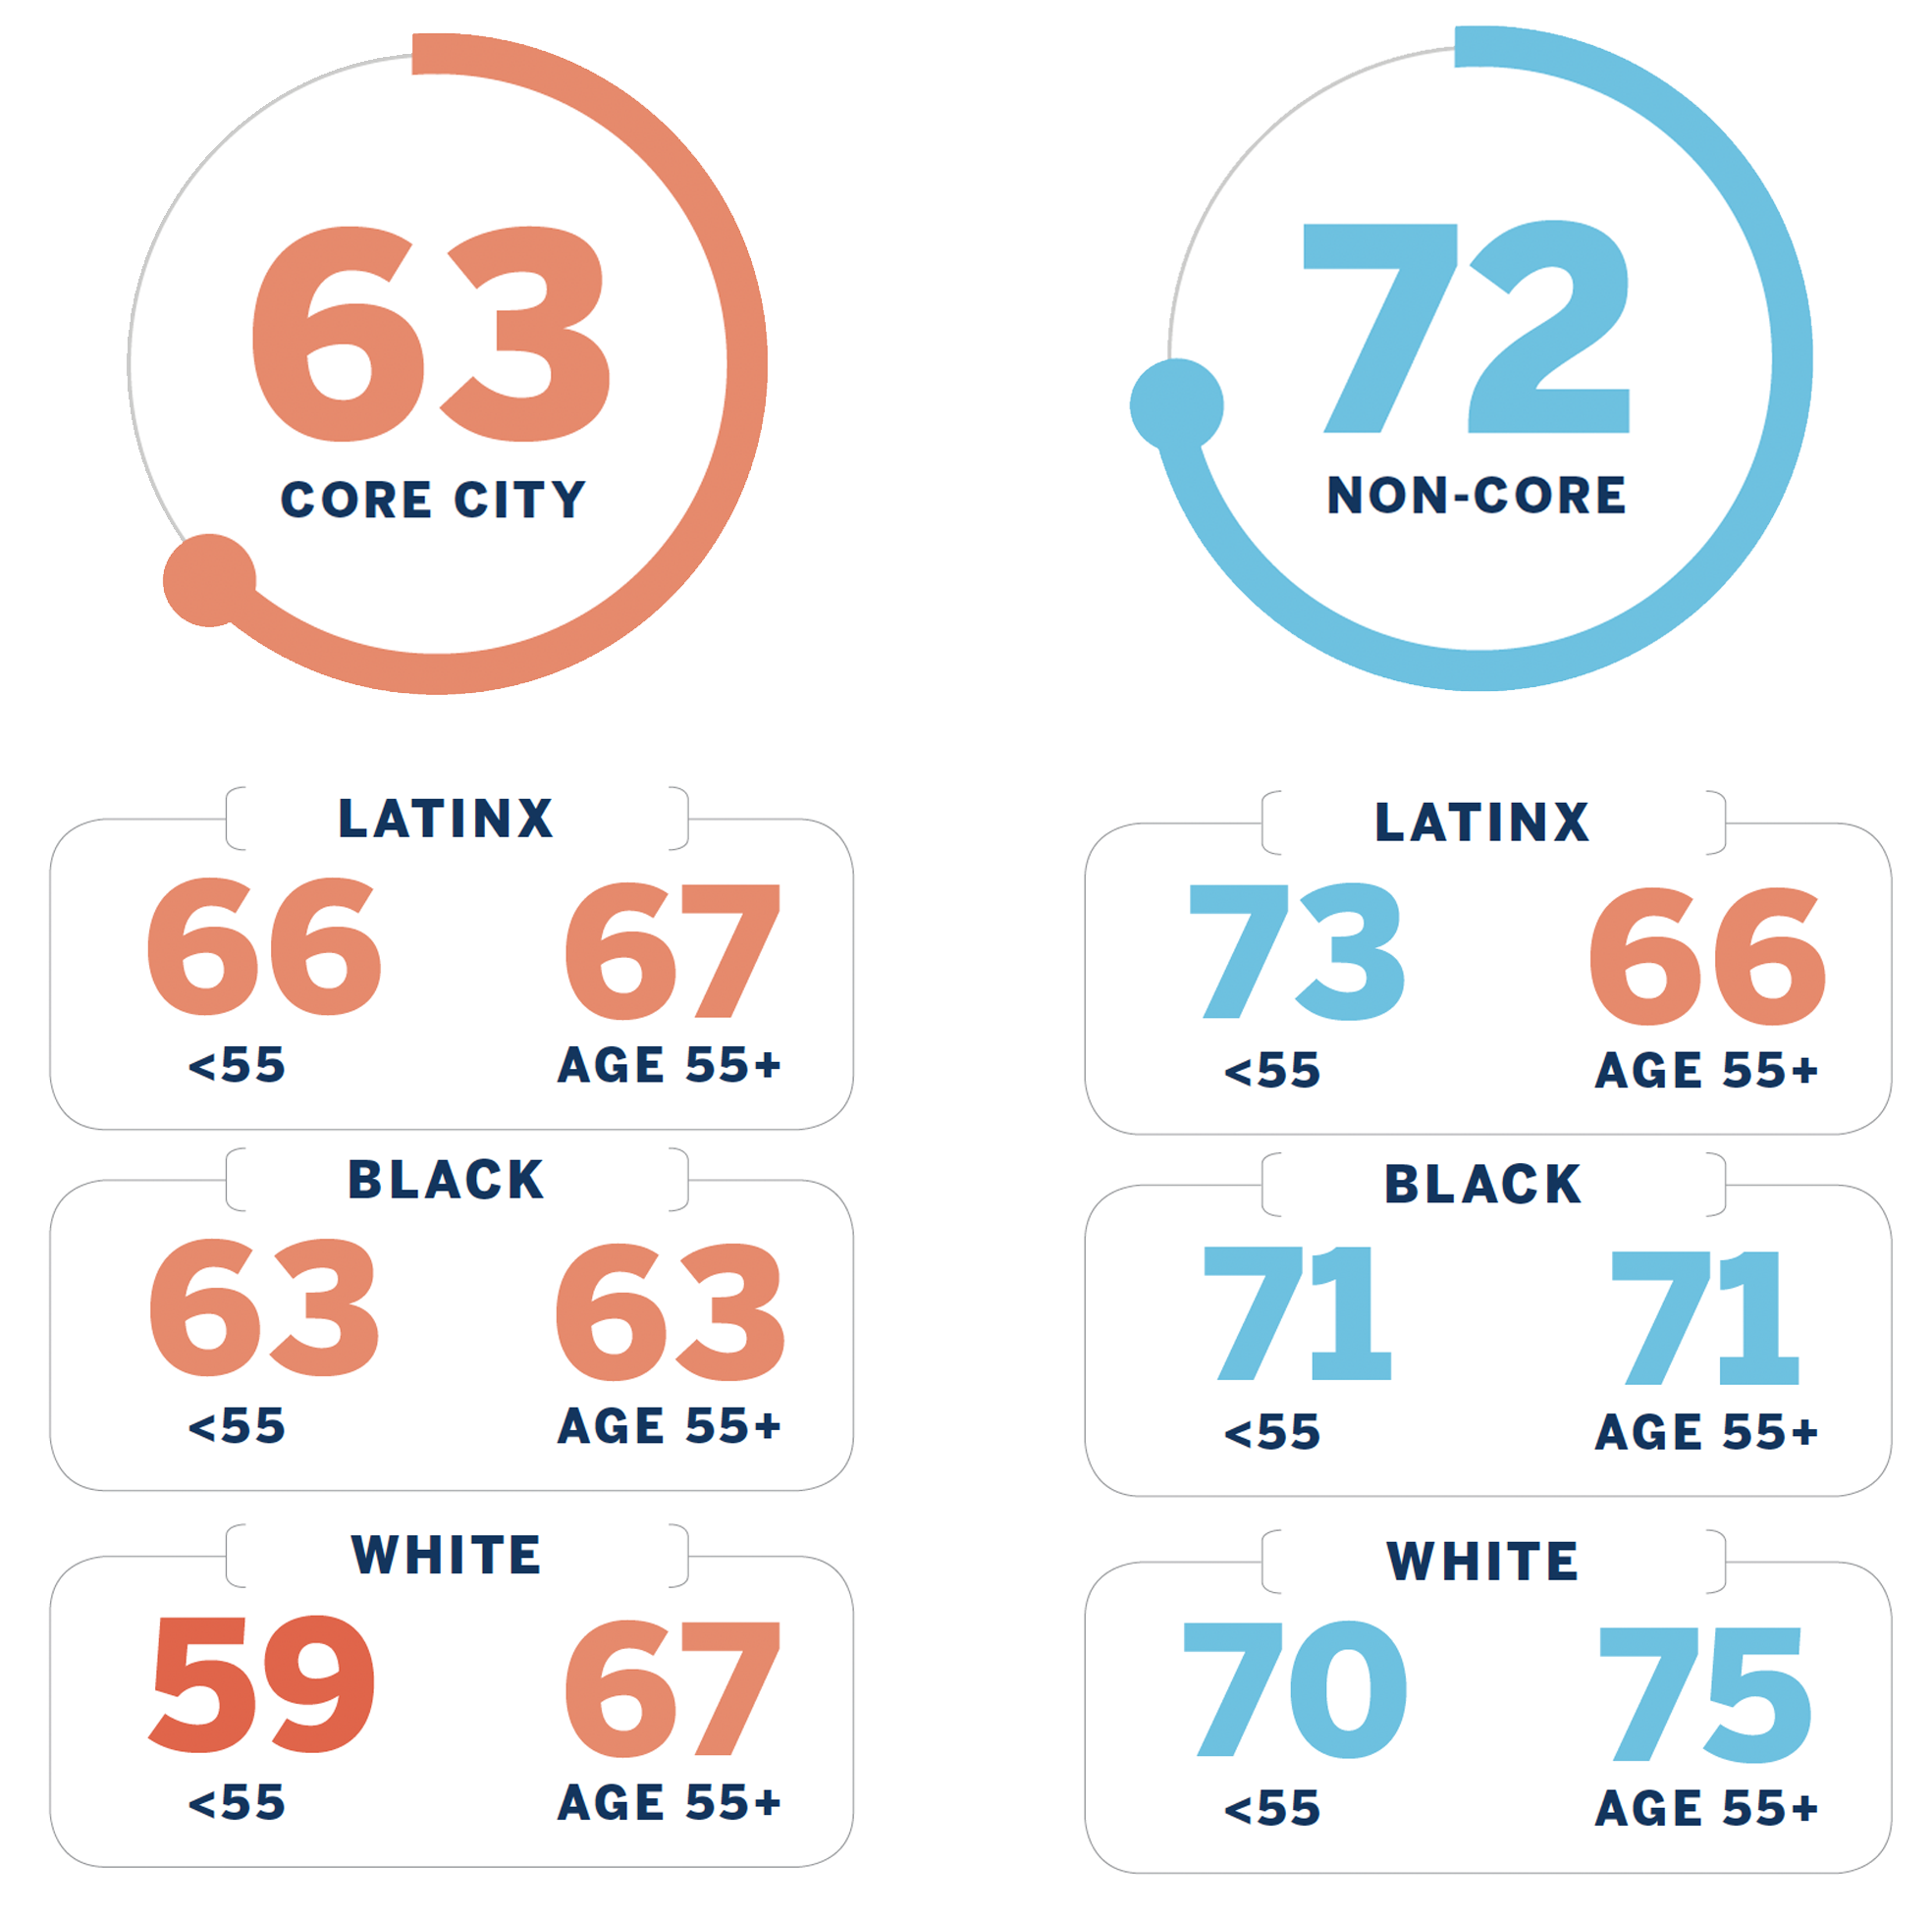 Chart breakdown: Core City: 63 (broken down by Latinx, Black, and White ages less than and over 55) Non-Core: 72 (broken down by Latinx, Black, and White ages less than and over 55)